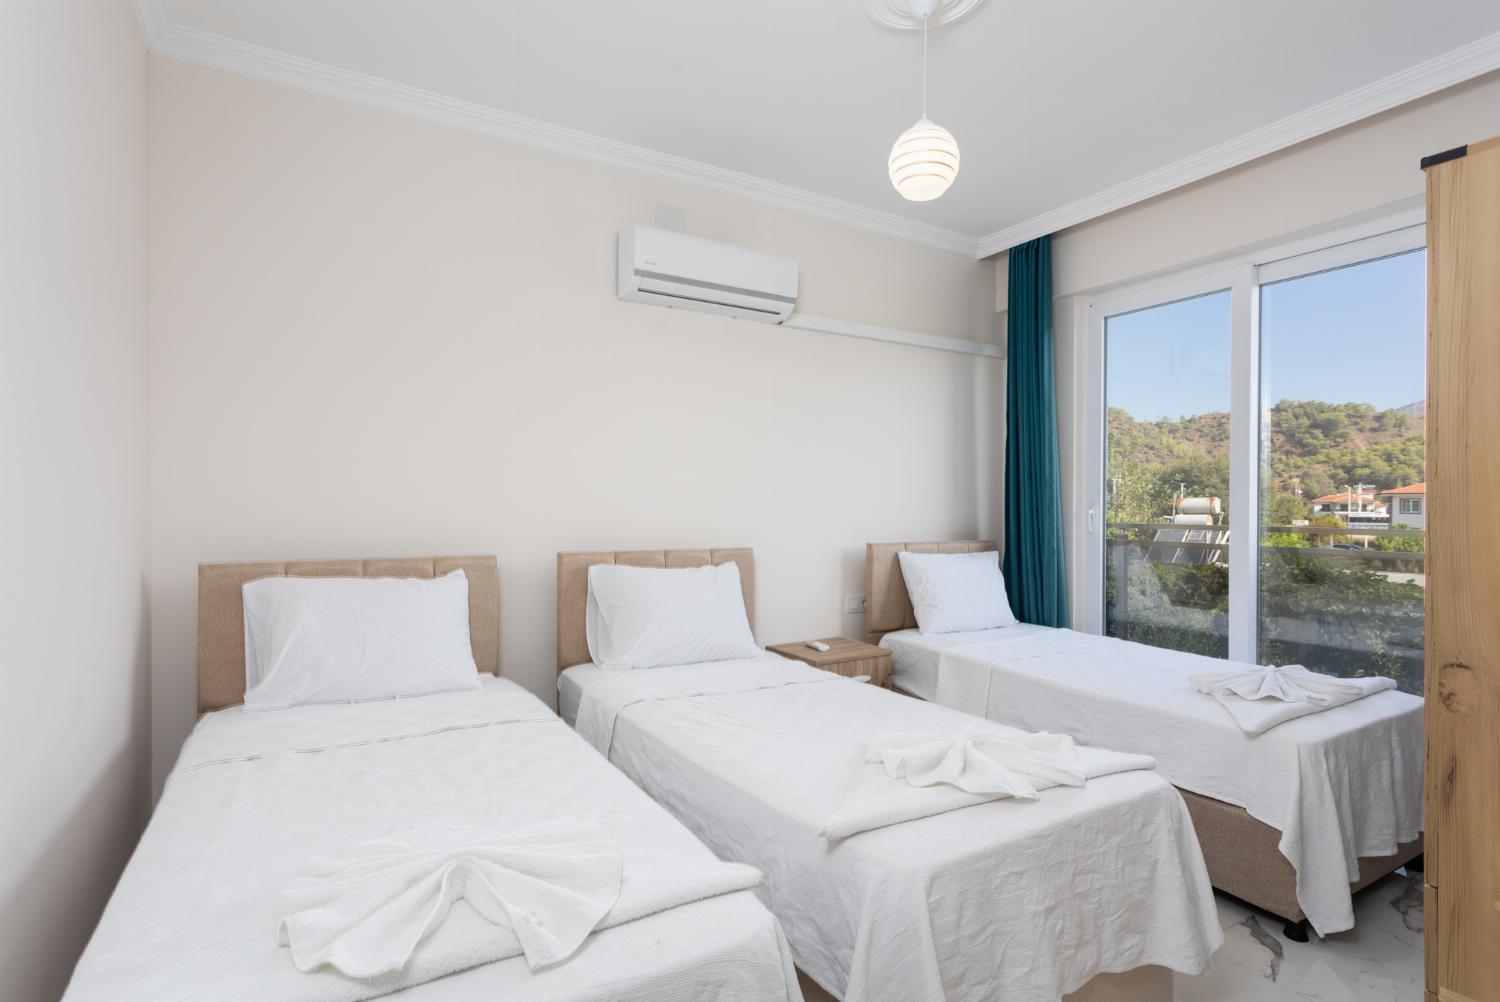 Bedroom with 3 single beds and A/C